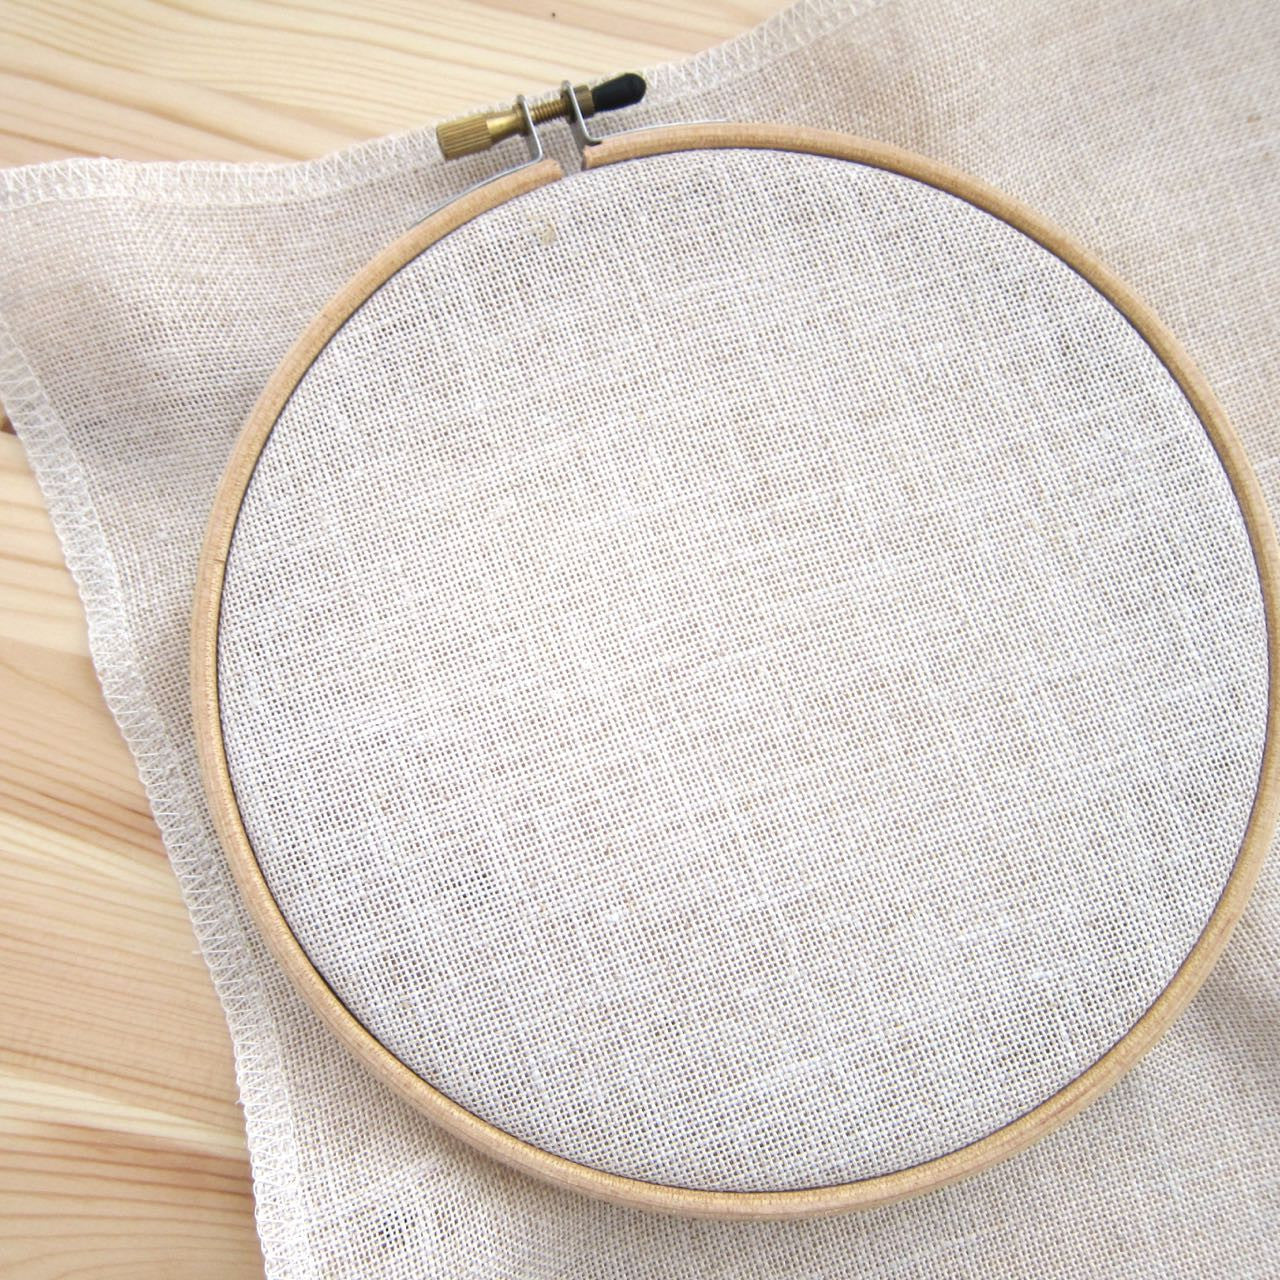 How To Cross Stitch On 28 Count Linen - Cross Stitch Patterns